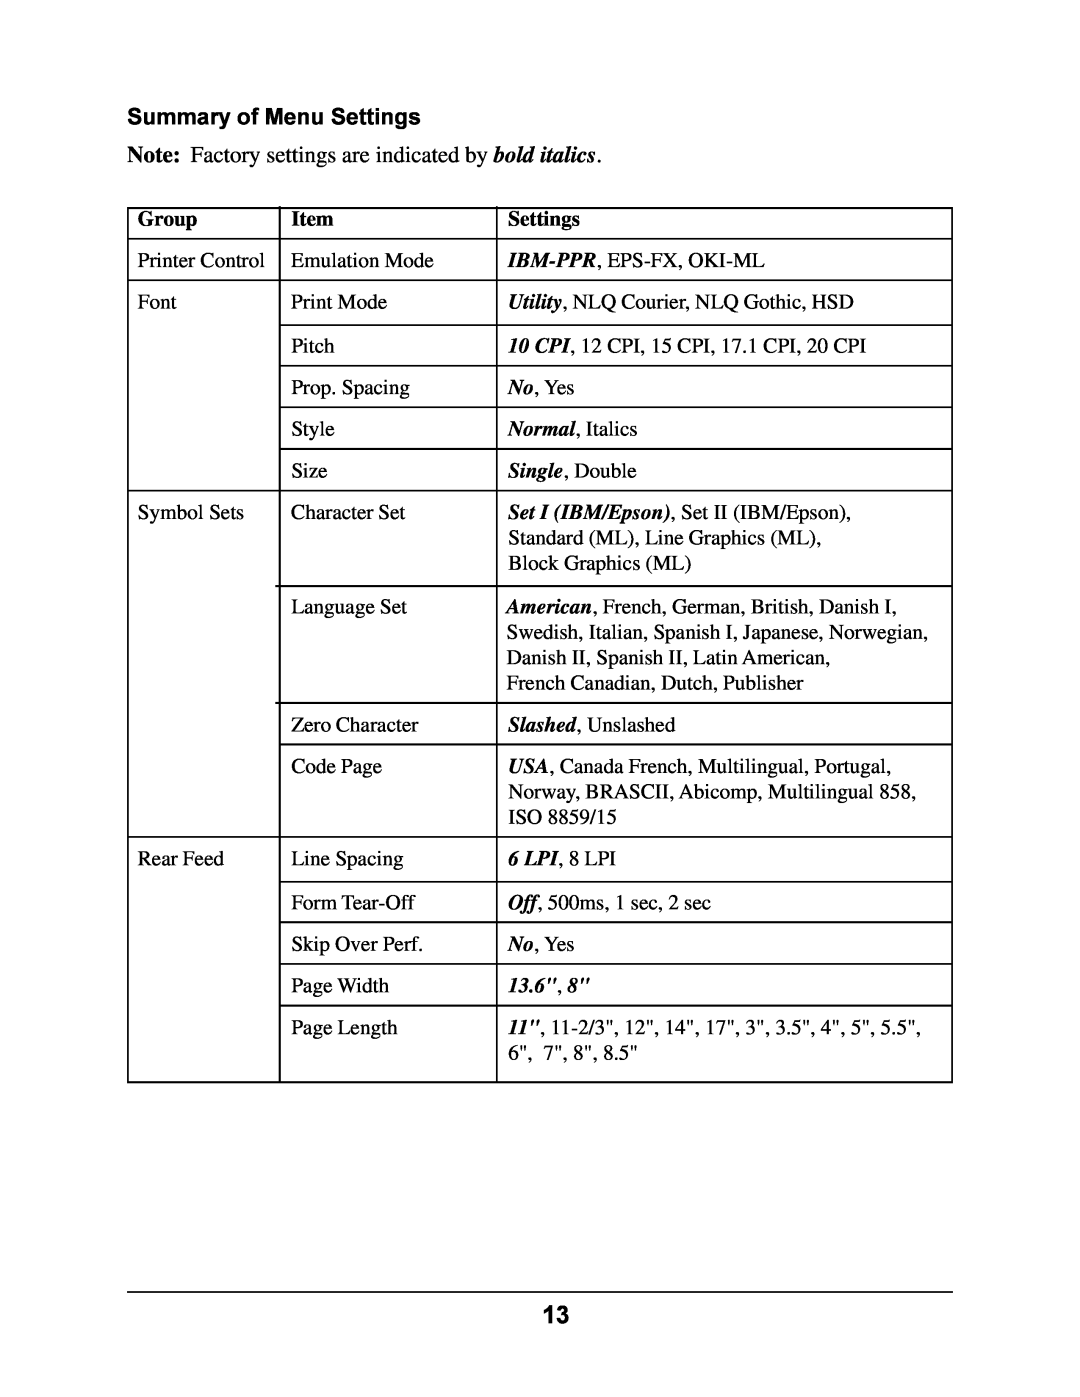 Oki 4410 manual Summary of Menu Settings, Note Factory settings are indicated by bold italics 